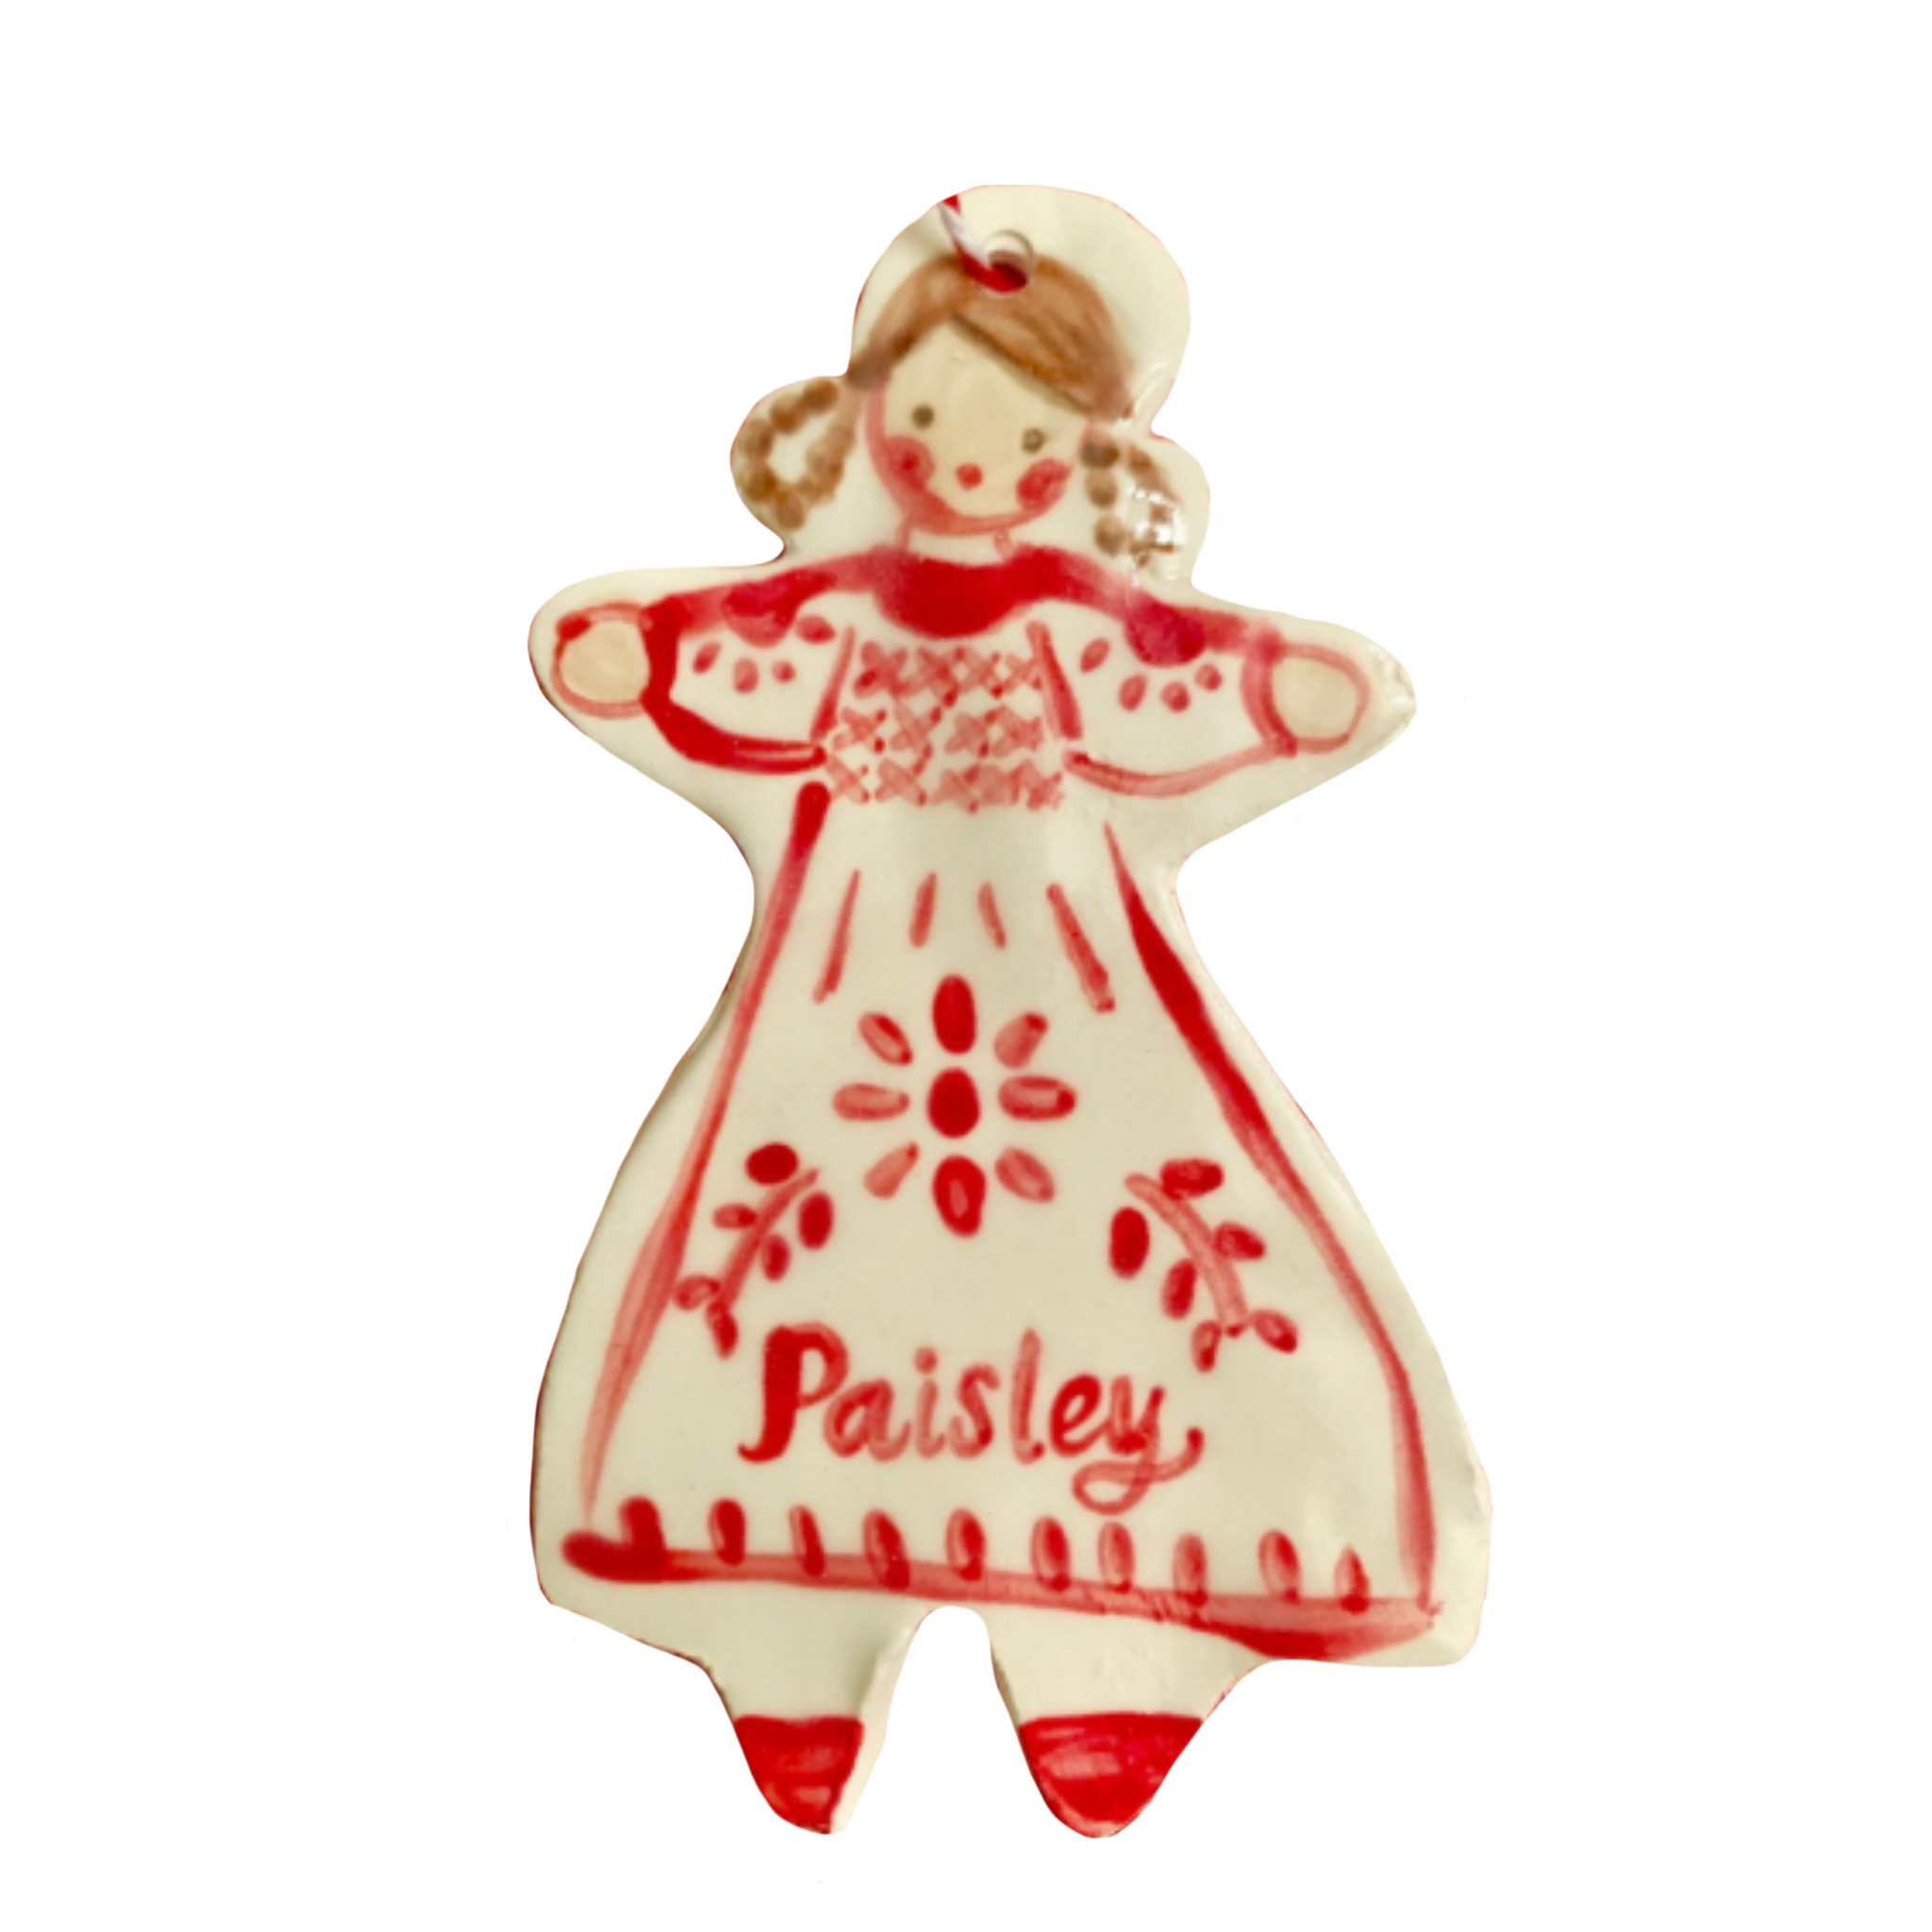 Christmas Ornament - Red Dress Girl - Tricia Lowenfield Design